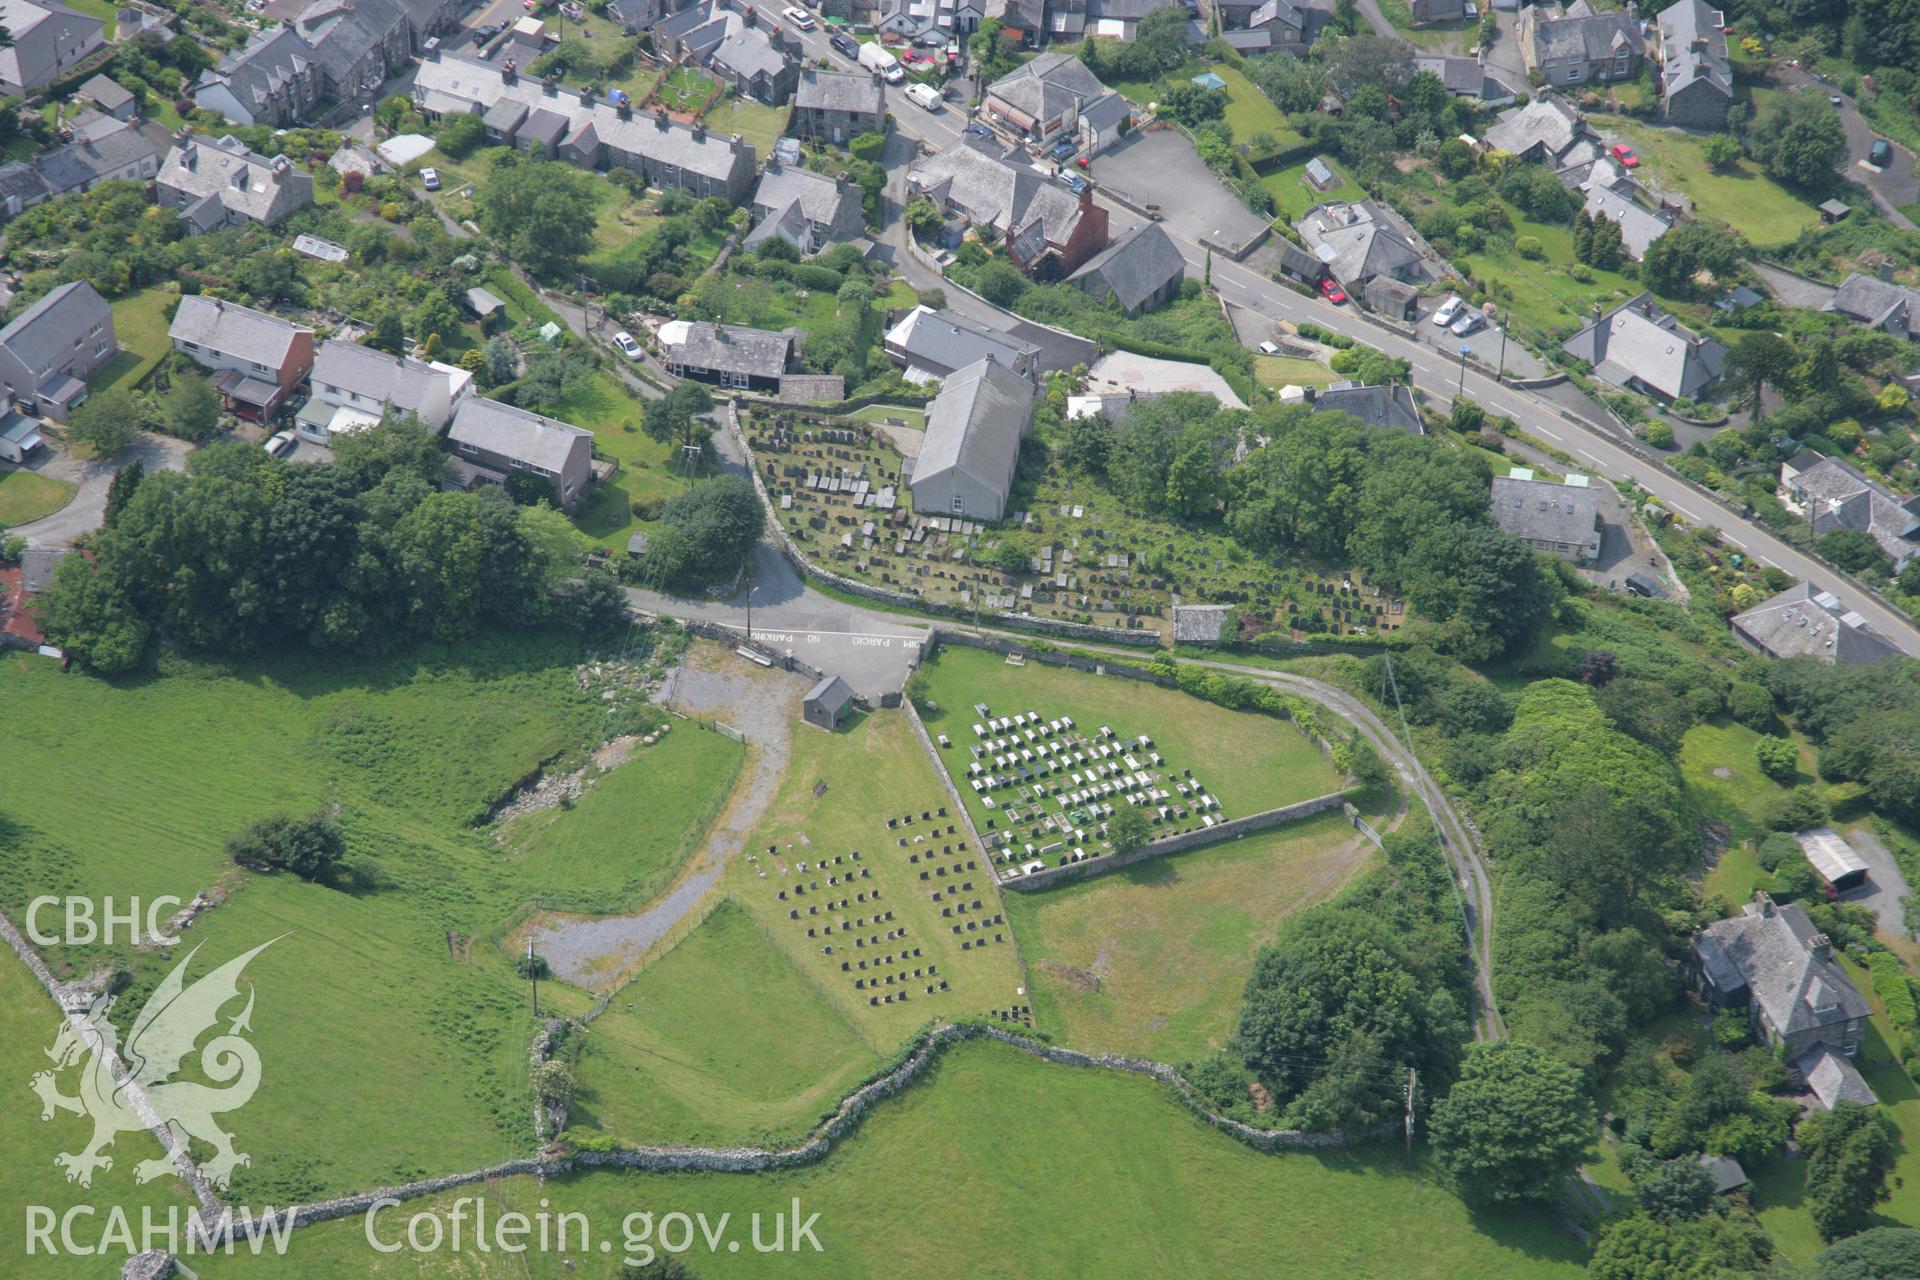 RCAHMW colour oblique aerial photograph of Rehoboth Baptist Chapel, Harlech. Taken on 04 July 2006 by Toby Driver.